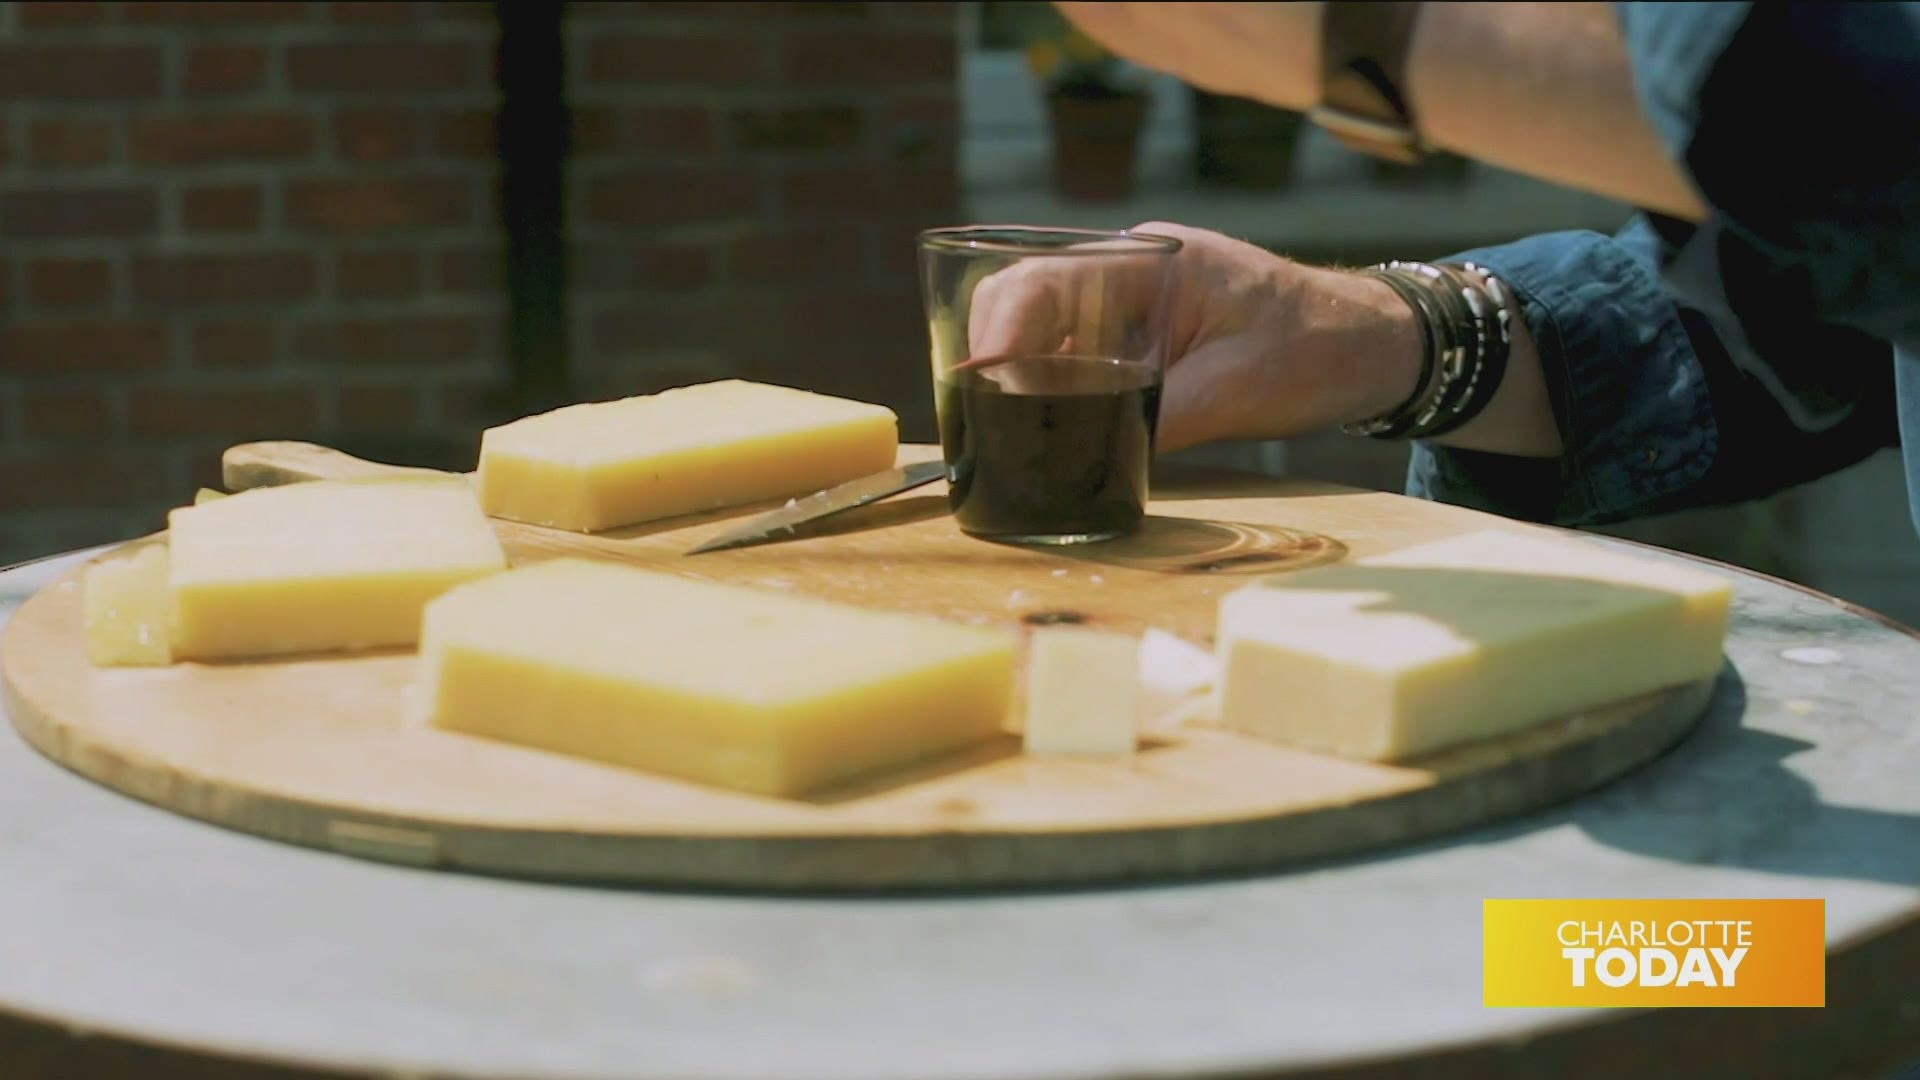 The UK's favorite cheddar is coming to America